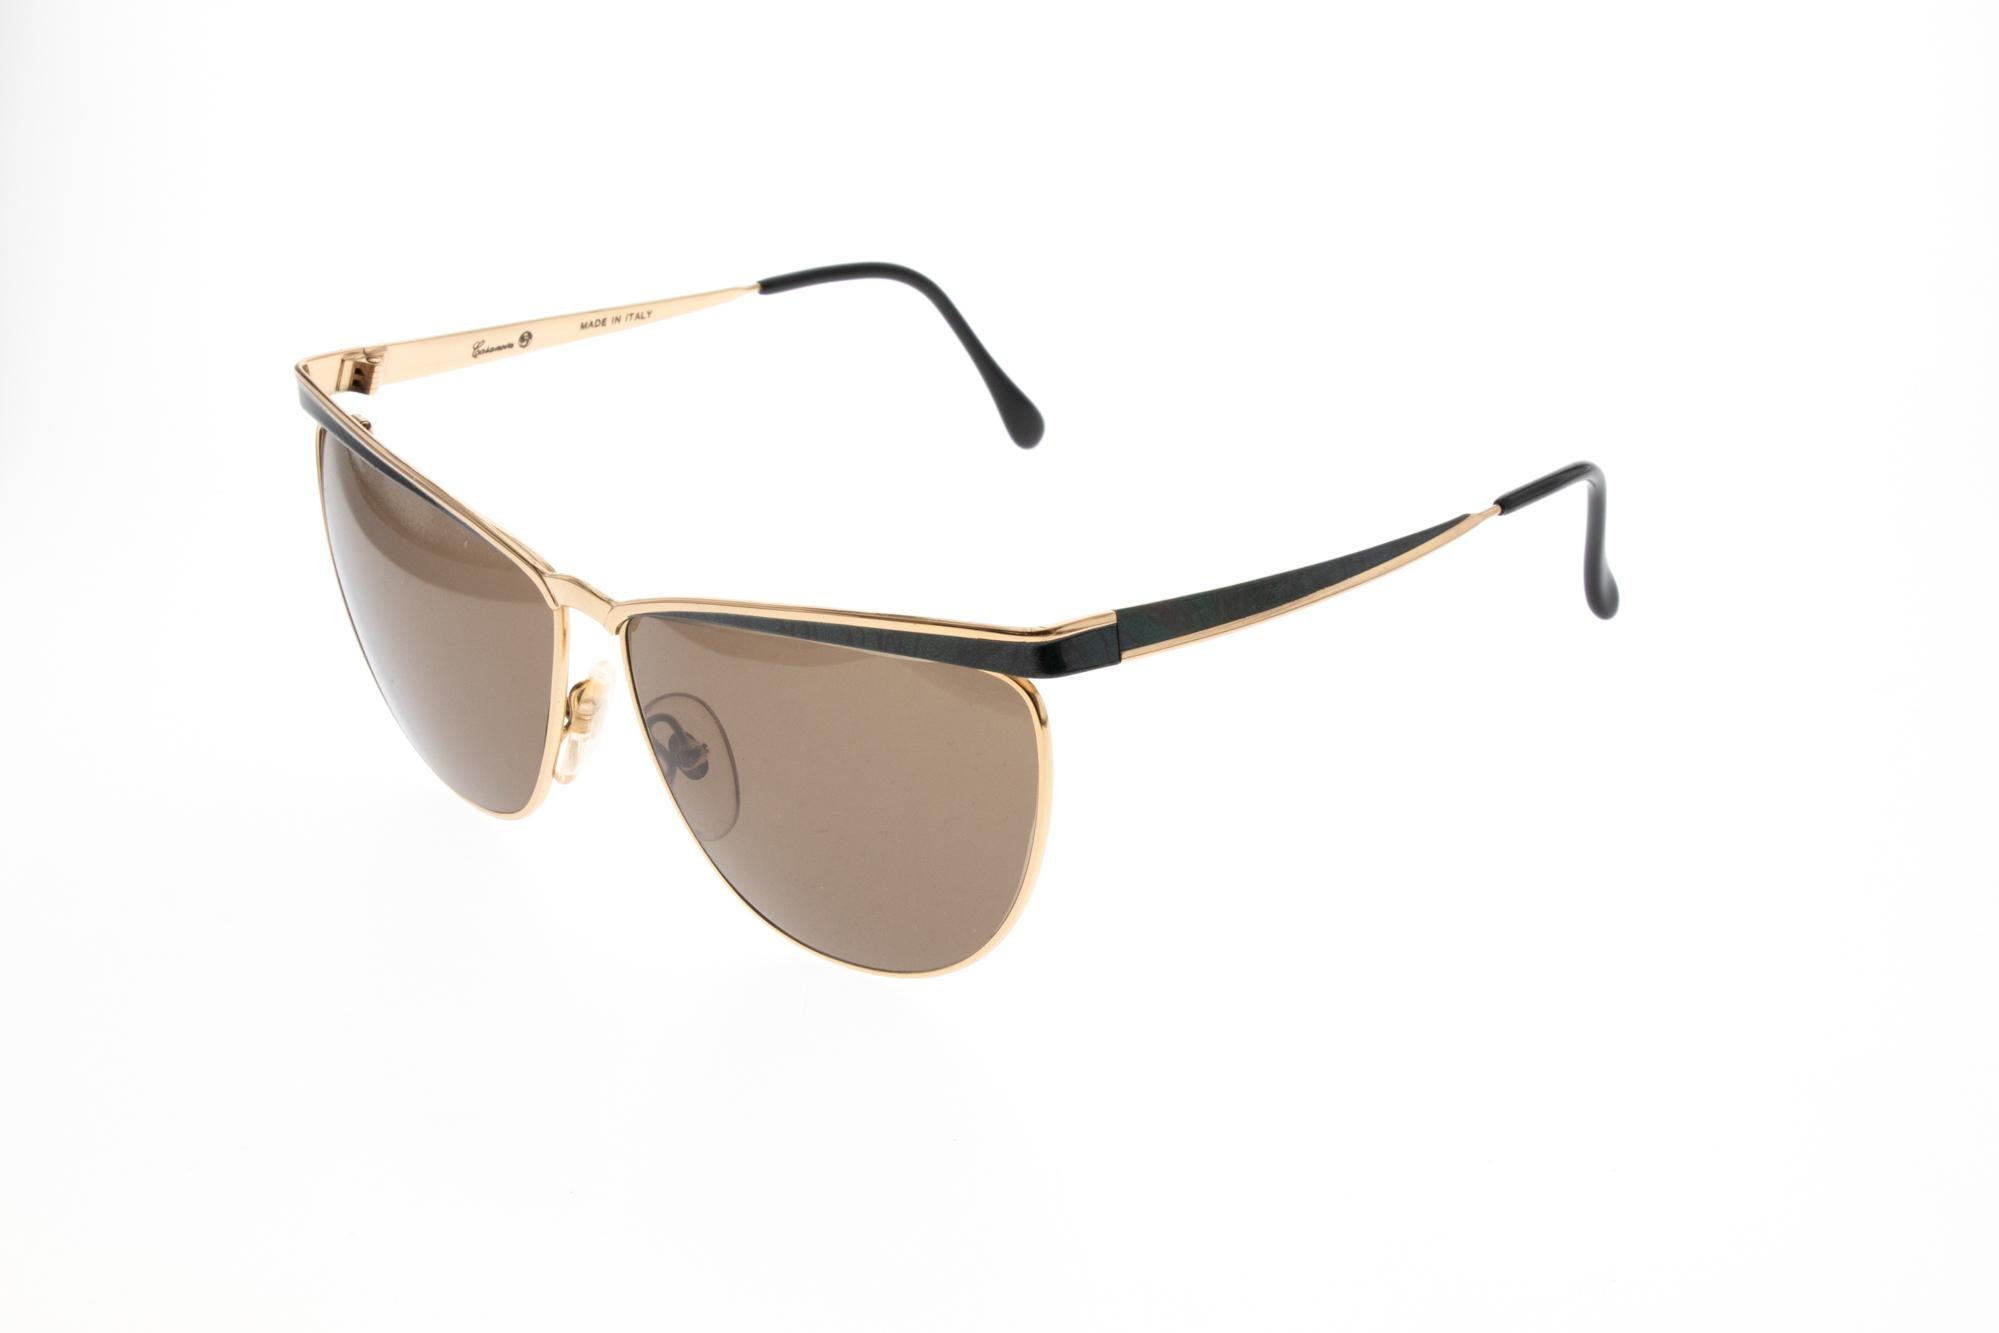 This Casanova model is a playful combination of a slight cat eye look with big sunglasses lenses. The combination of gold and dark green gives it a very unique and classy look and feel. Its origin lies in the 80s. These glasses are very rare and a